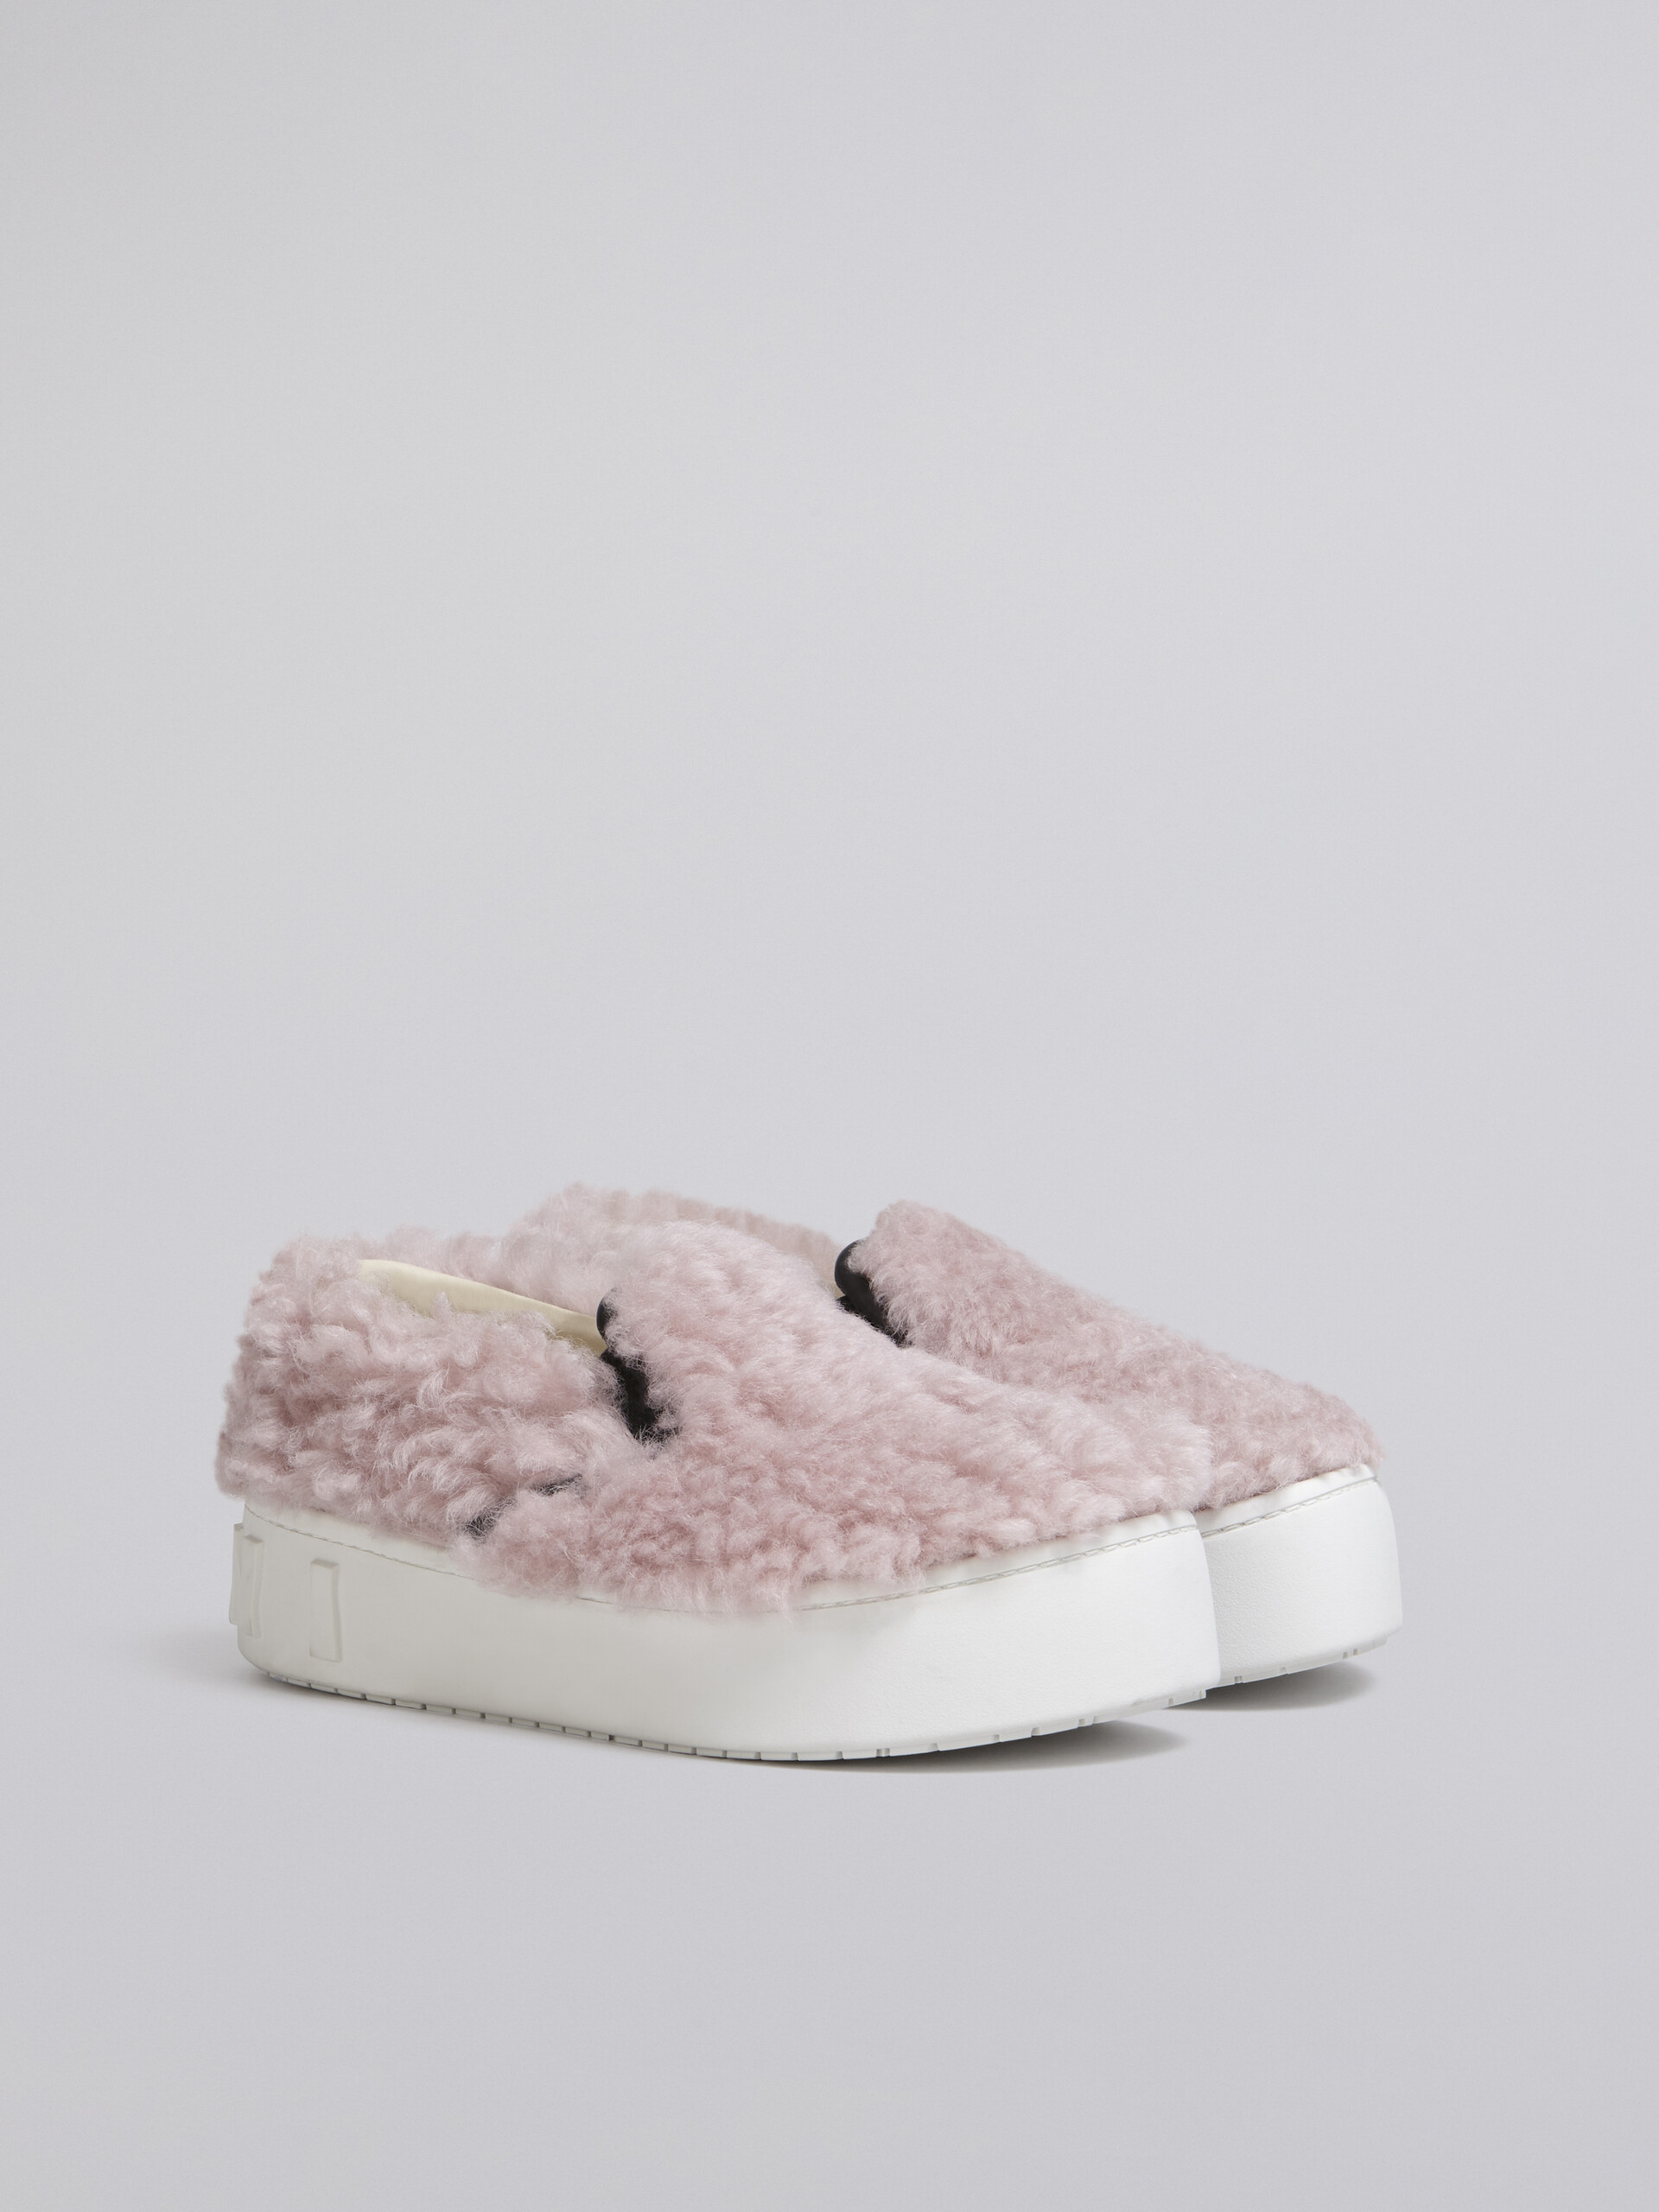 Light blue shearling slip-on sneaker with maxi Marni logo - Sneakers - Image 2